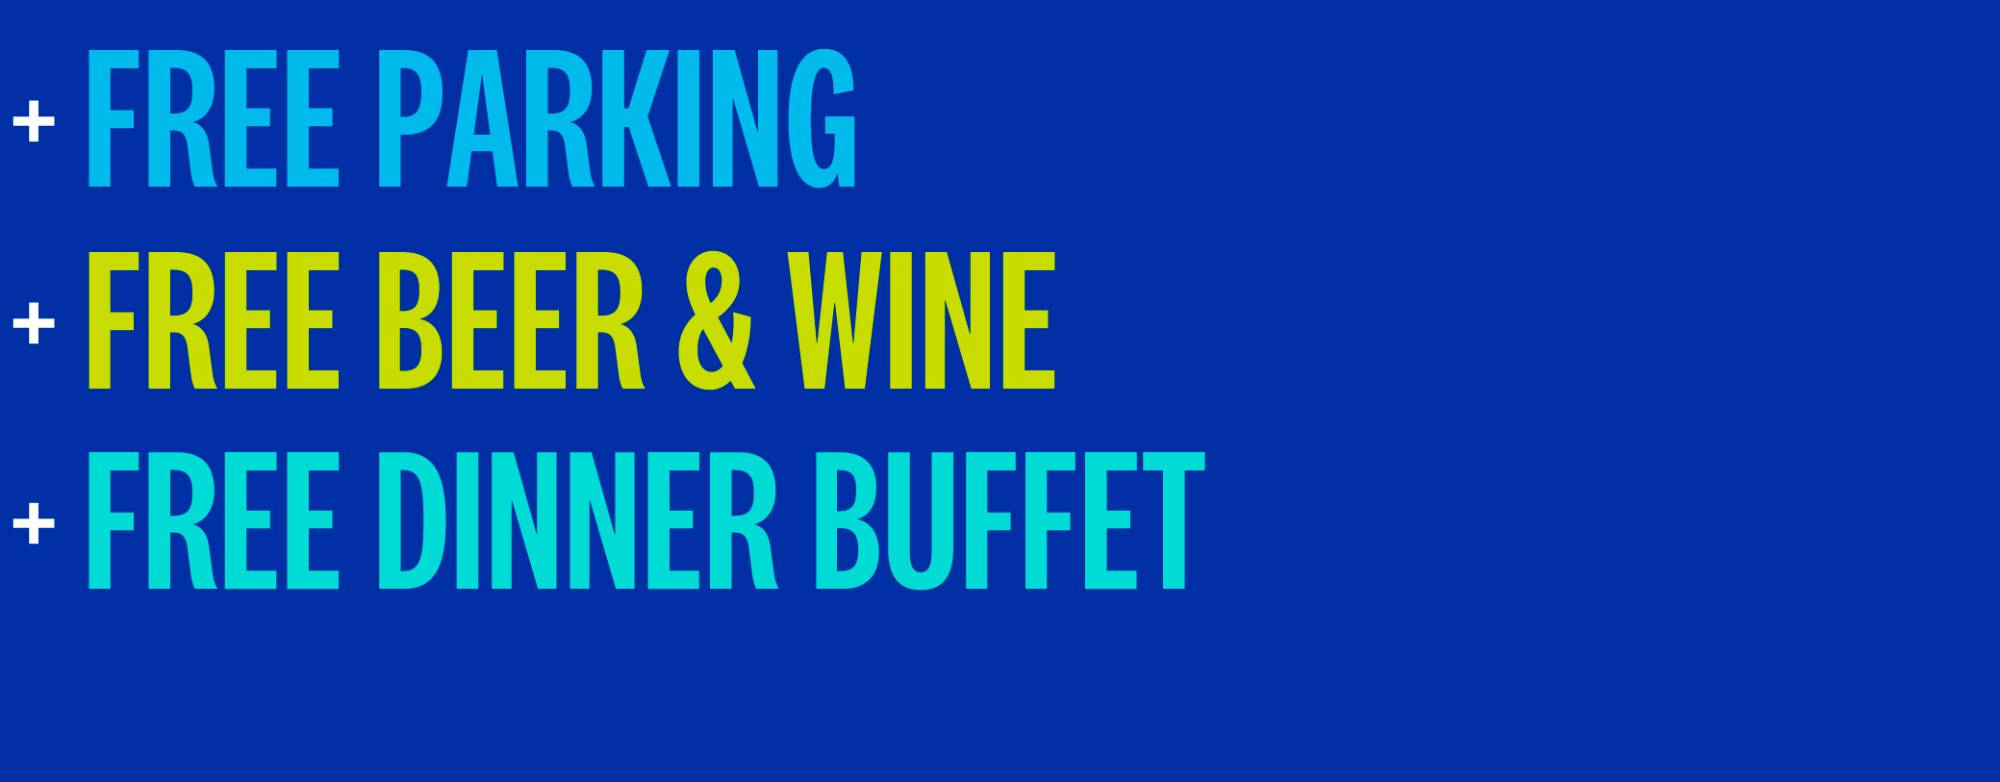 Free parking, free beer and wine, free dinner buffet